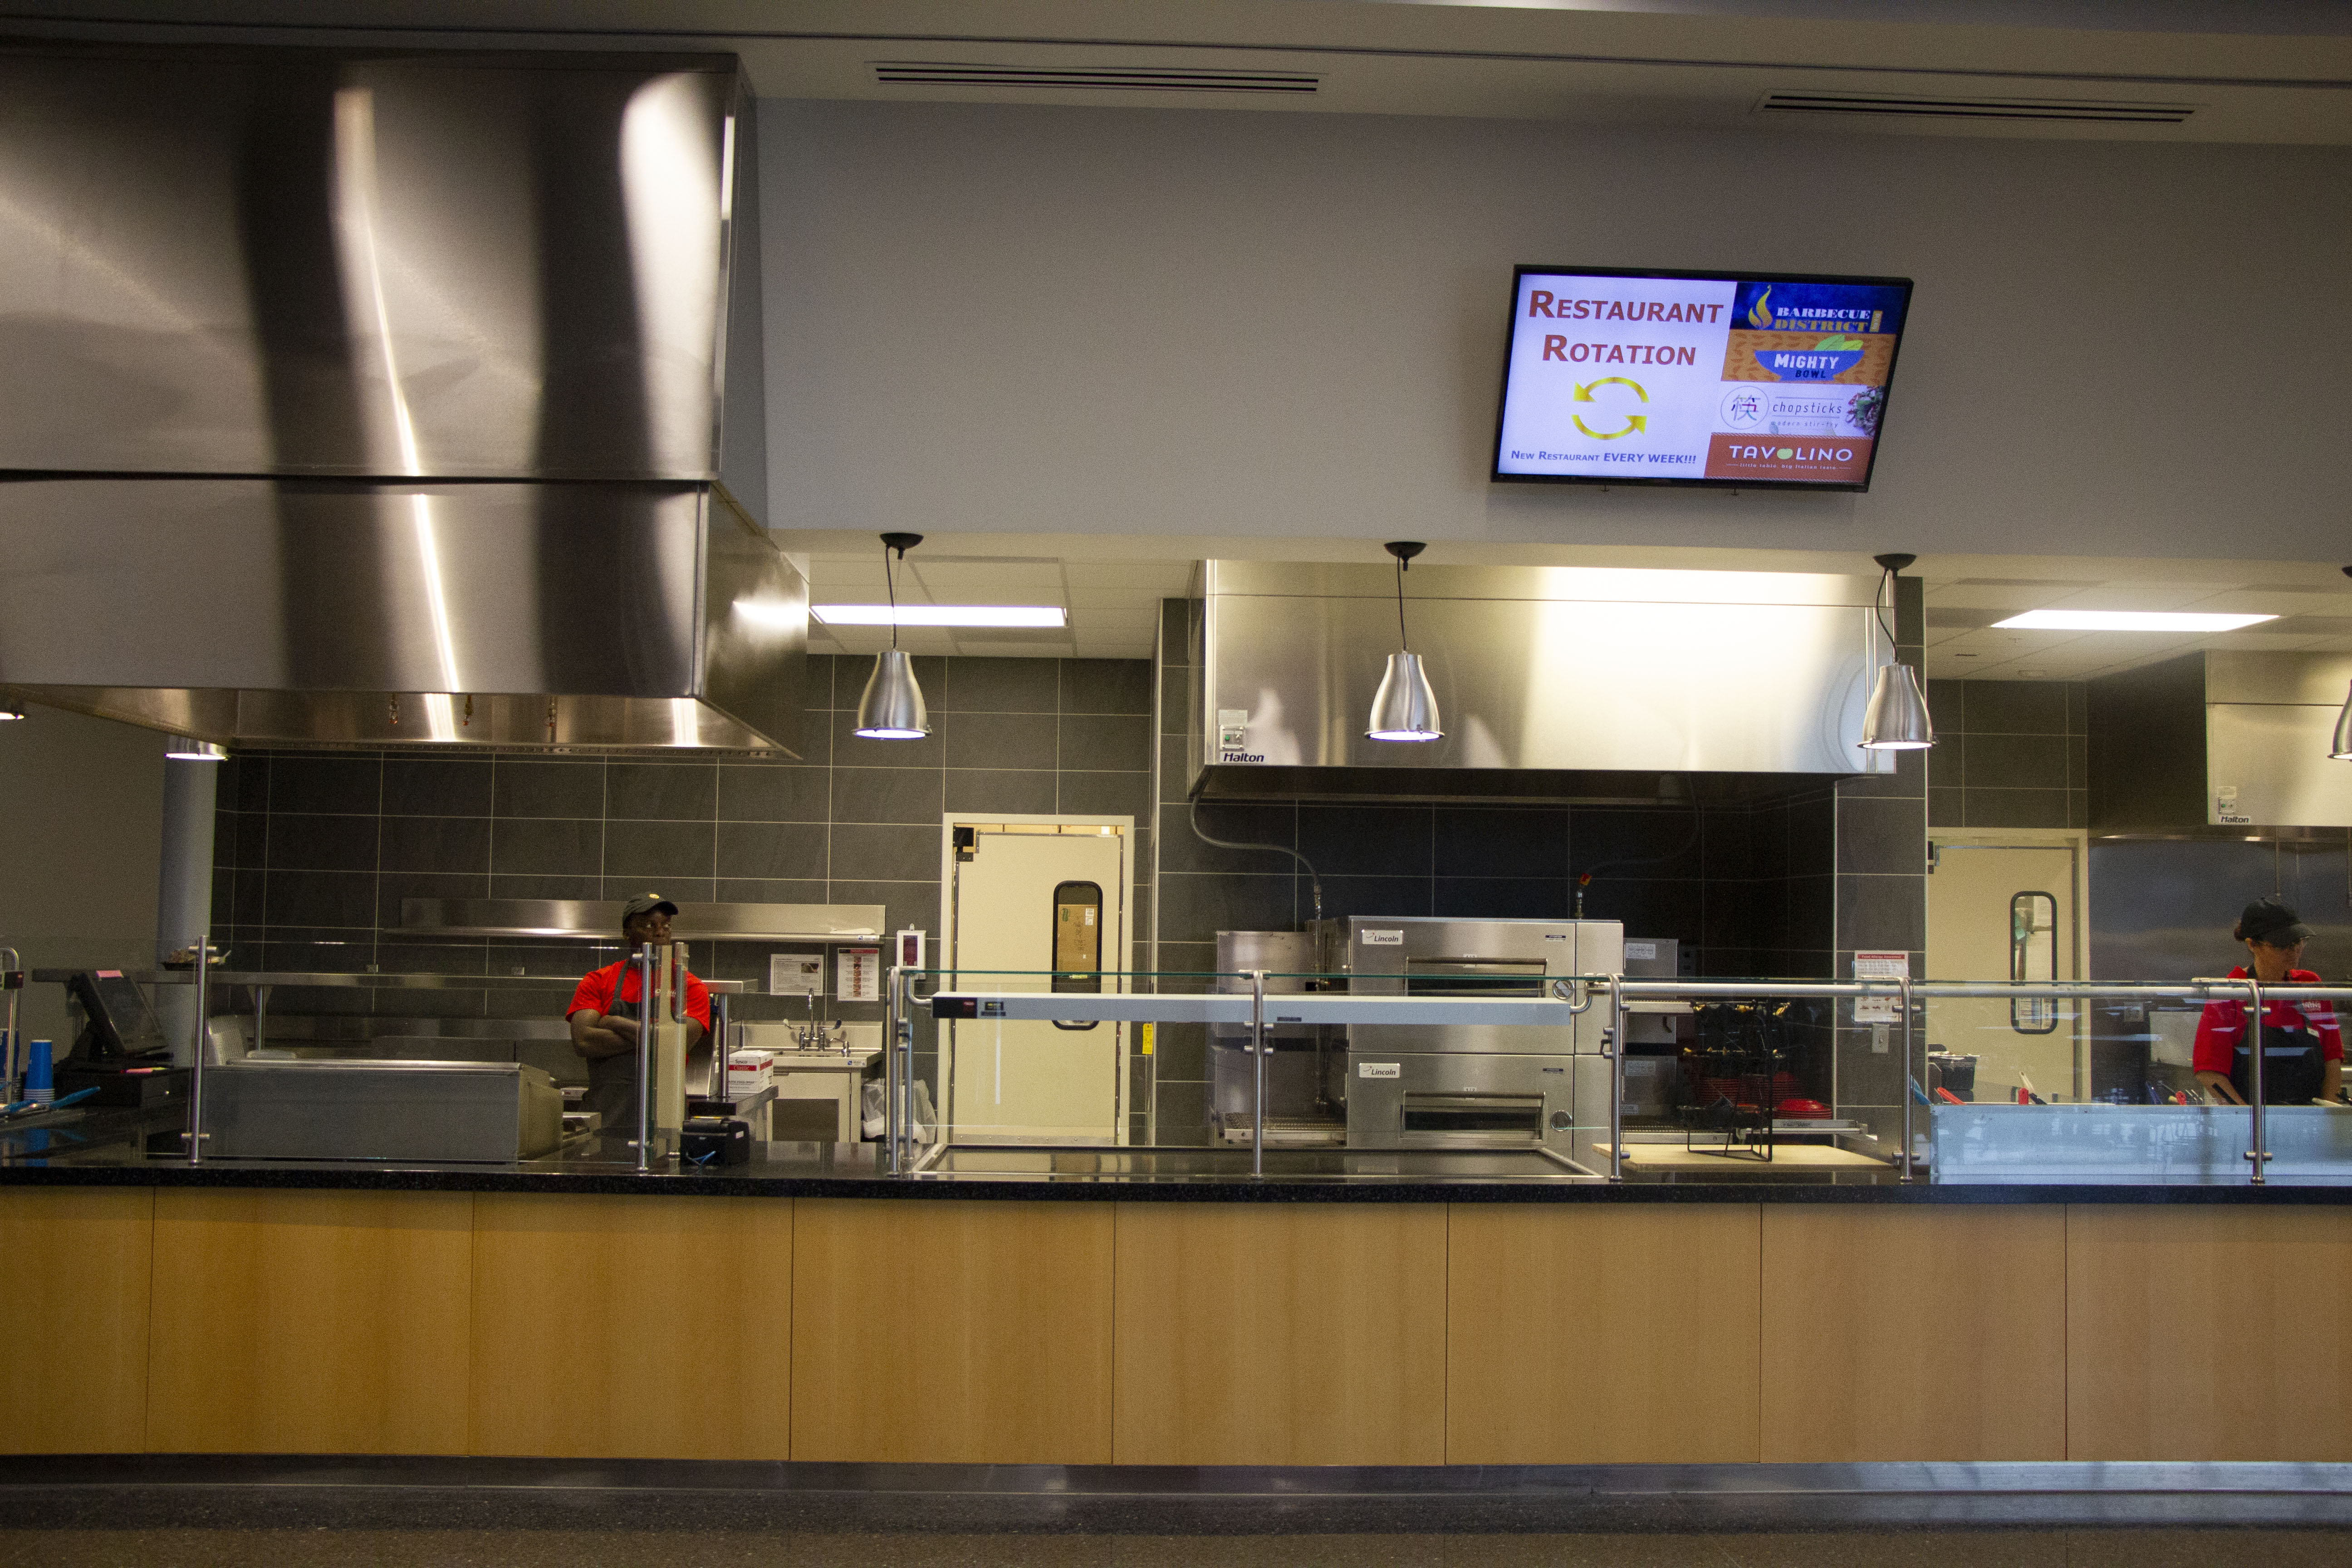 New restaurants in the MUC offer variety for students, faculty